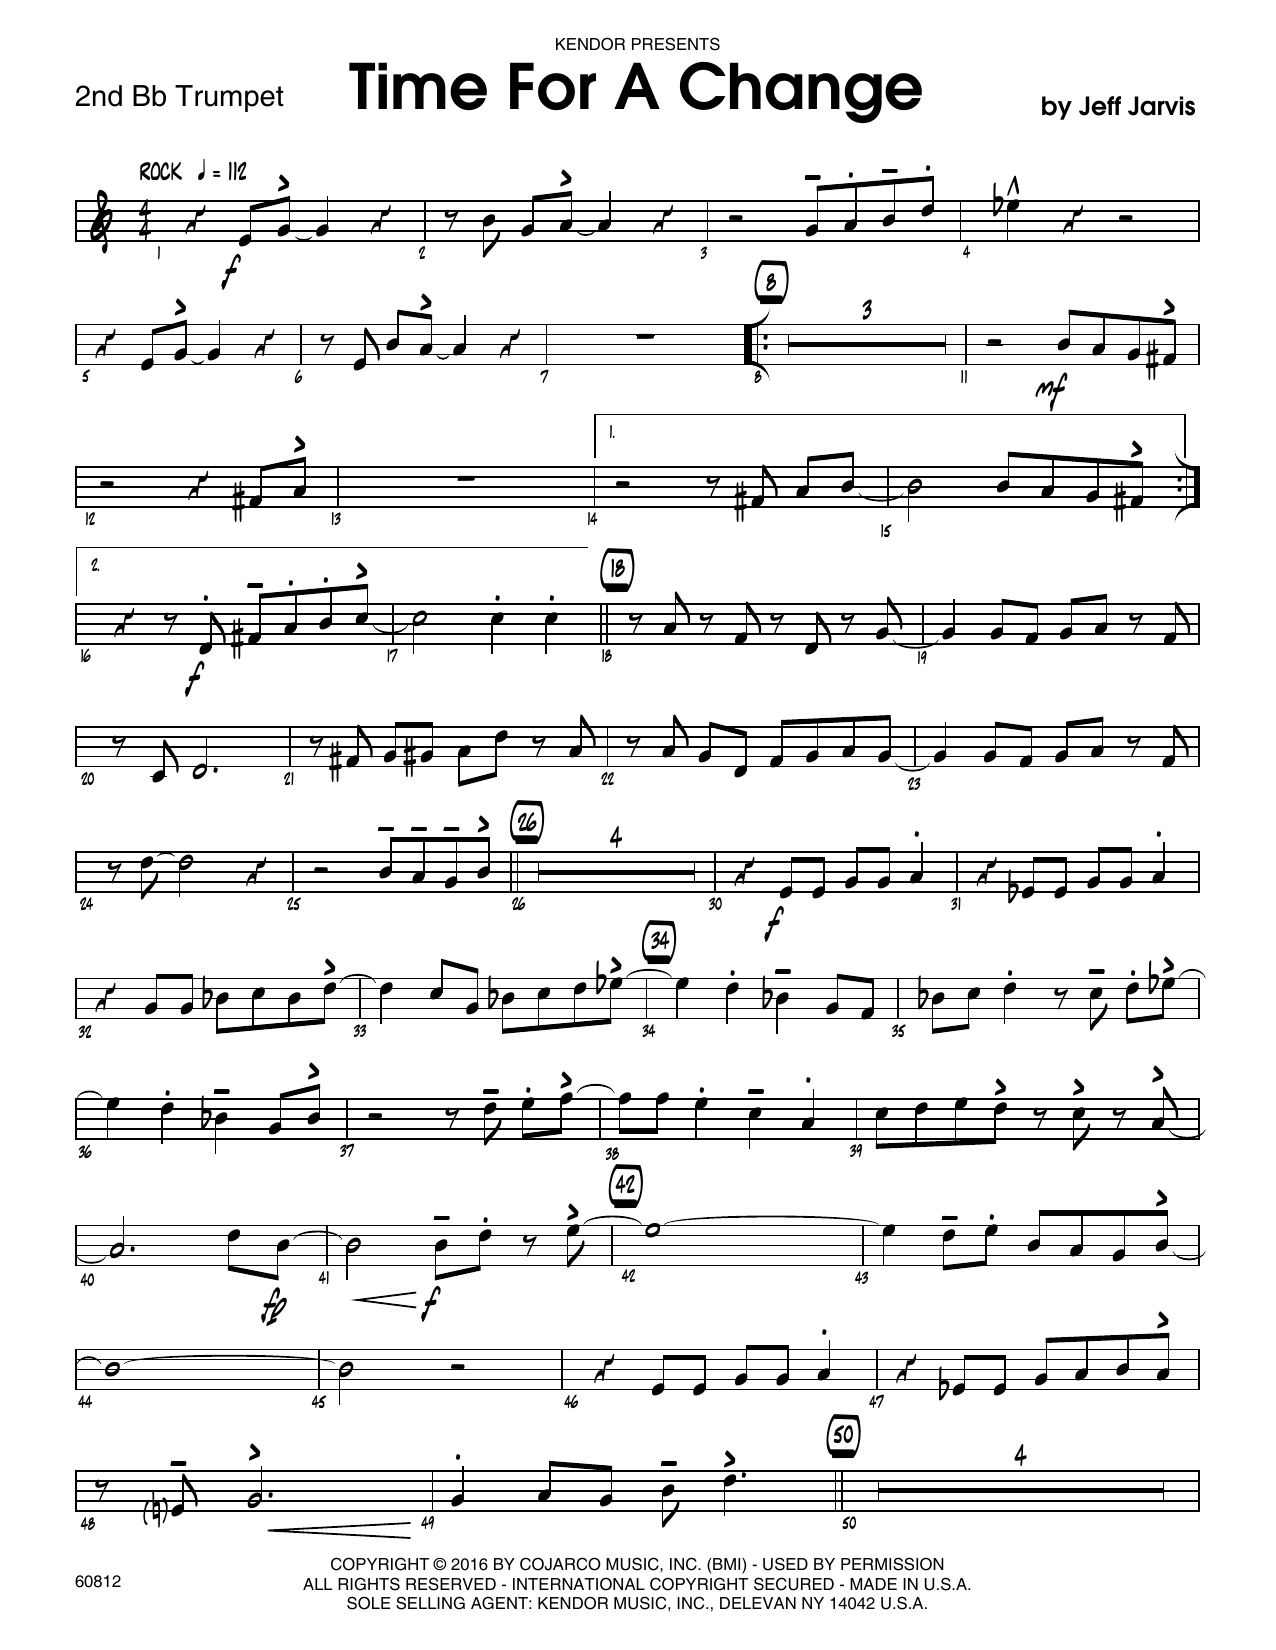 Download Jeff Jarvis Time For A Change - 2nd Bb Trumpet Sheet Music